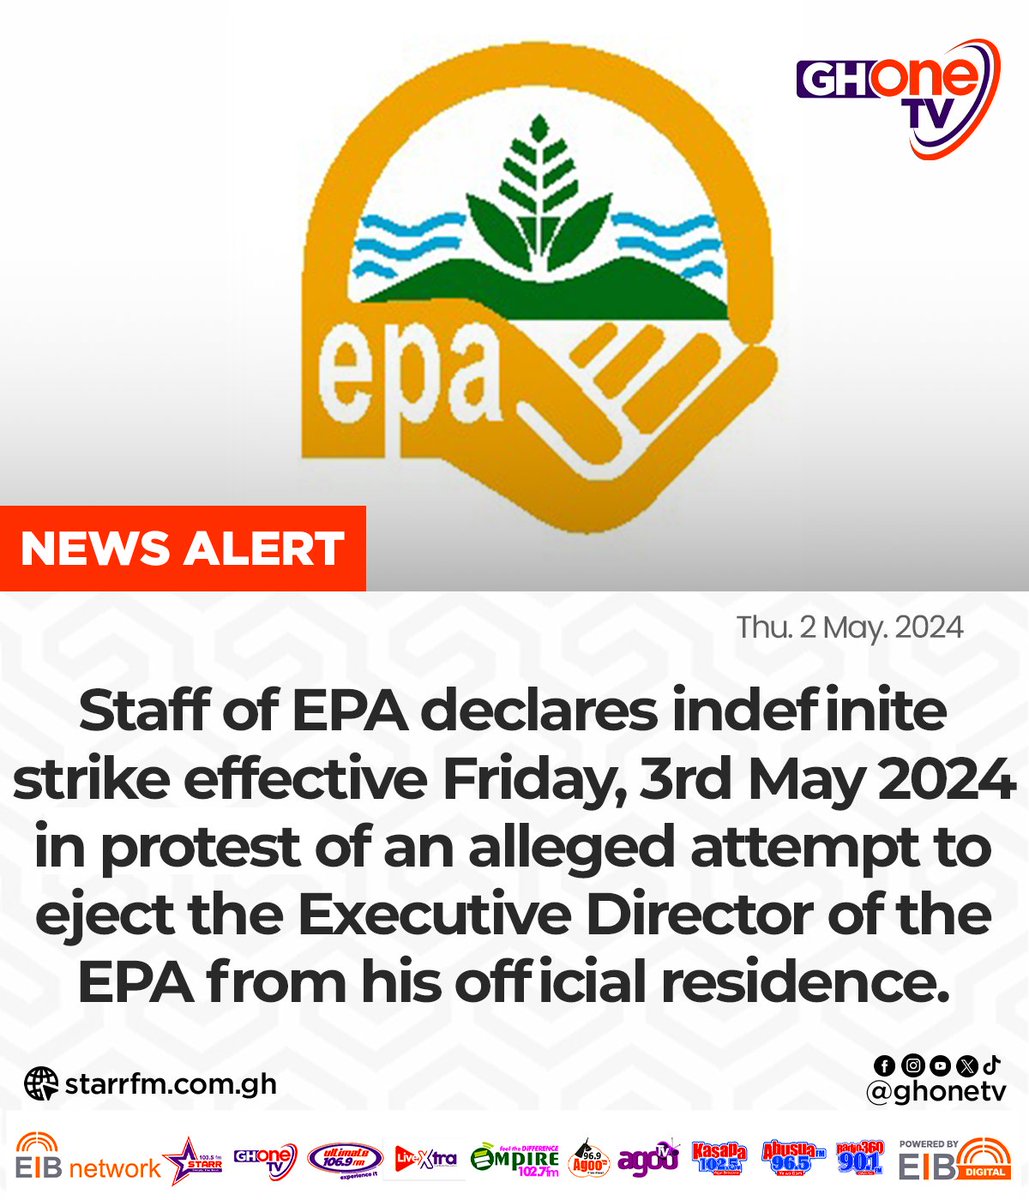 Public Services Workers Union of EPA declares indefinite strike effective Friday, 3rd May 2024 in protest of an alleged attempt to eject the Executive Director of the EPA from his official residence.

#GHOneNews #GHOneTV